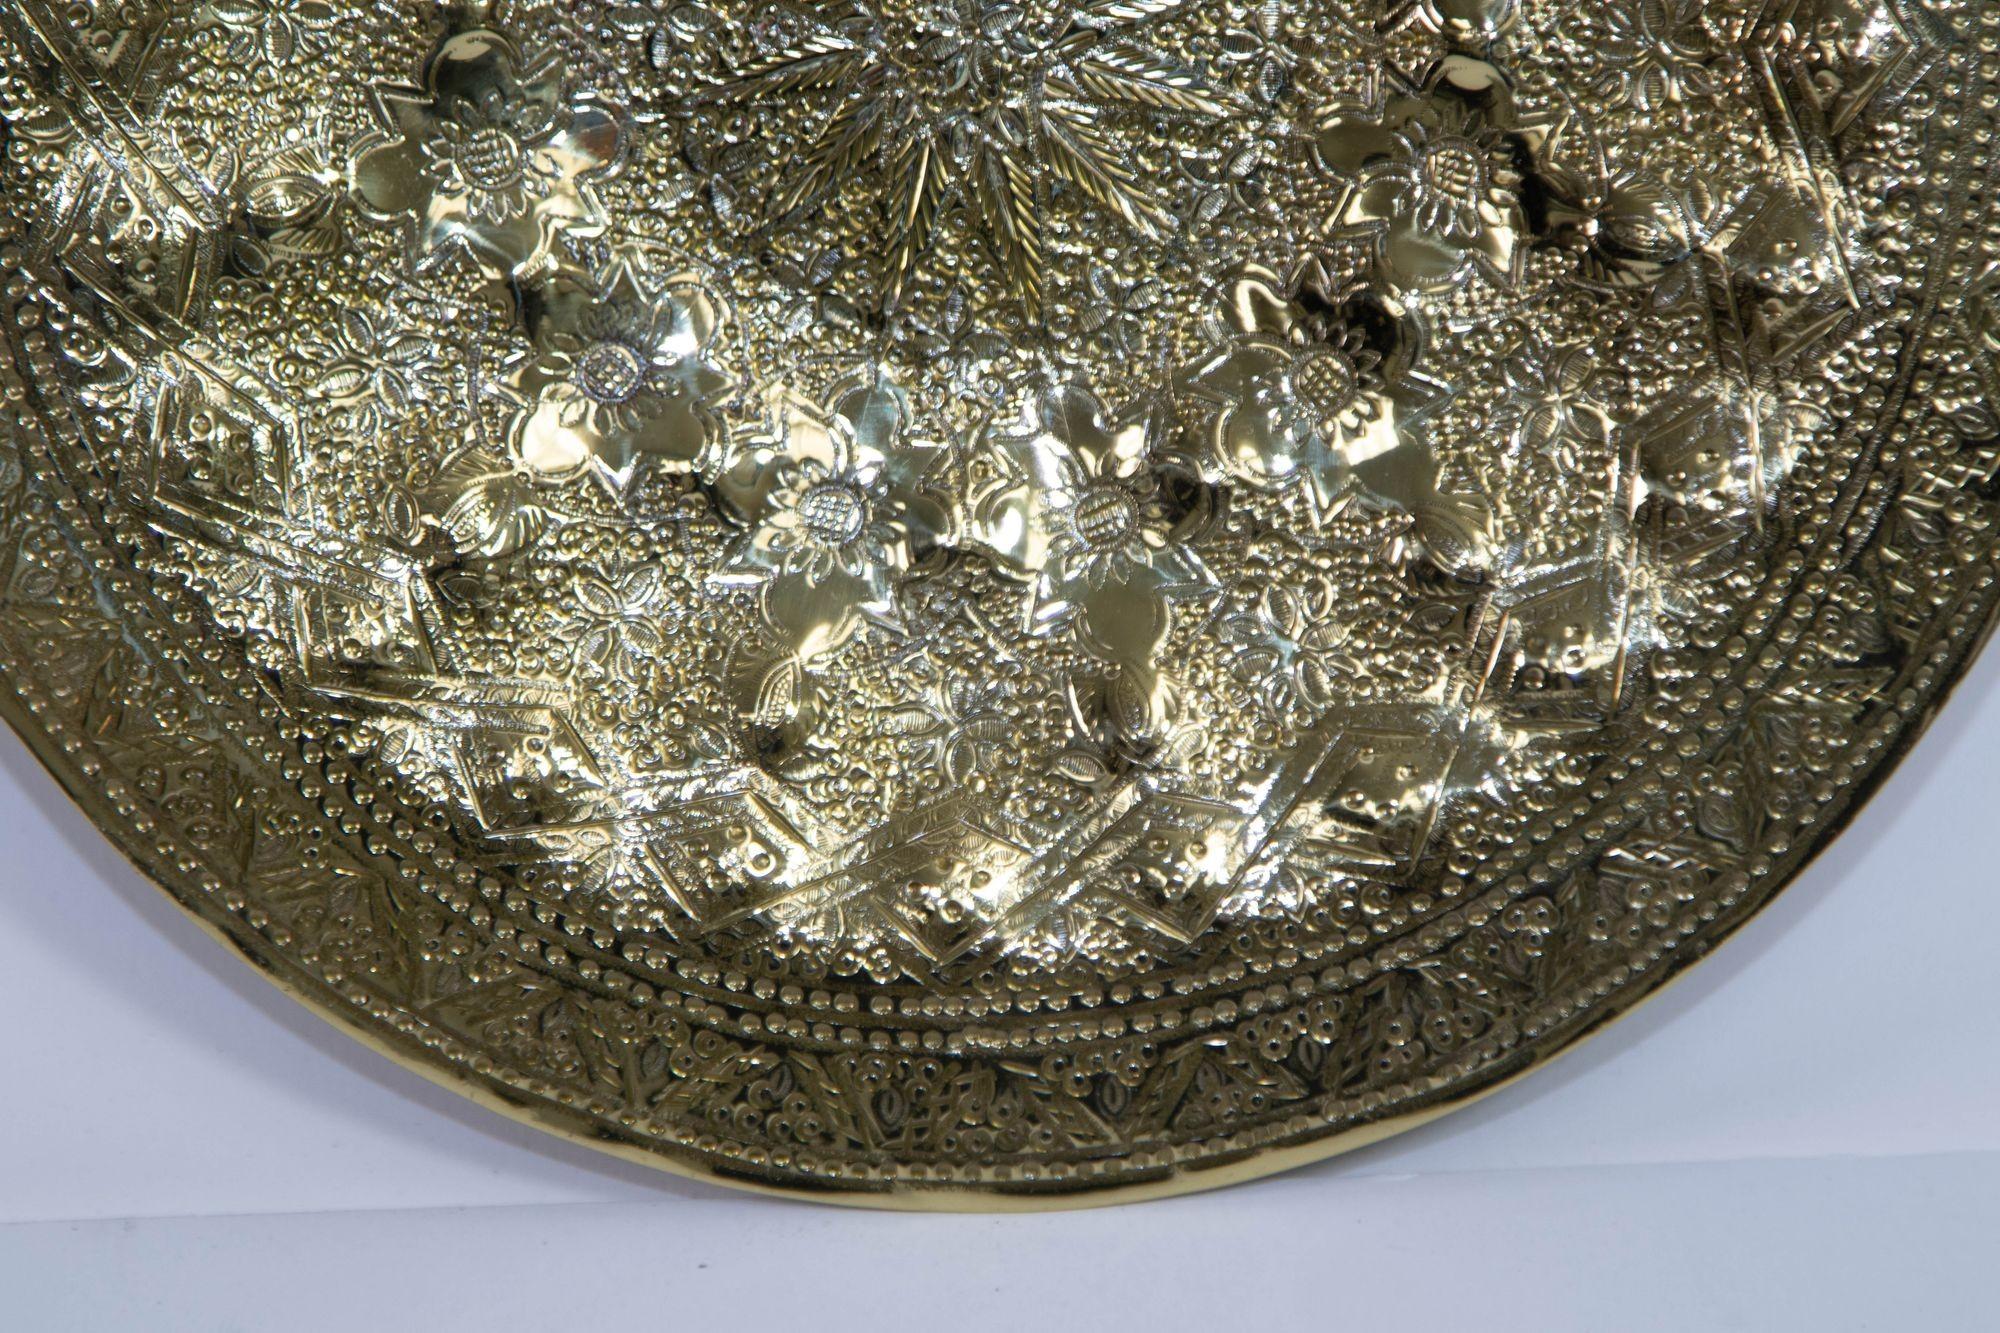 Islamic Persian Polished Brass Tray Collectible Metal Work Platter 10 inches D. In Good Condition For Sale In North Hollywood, CA